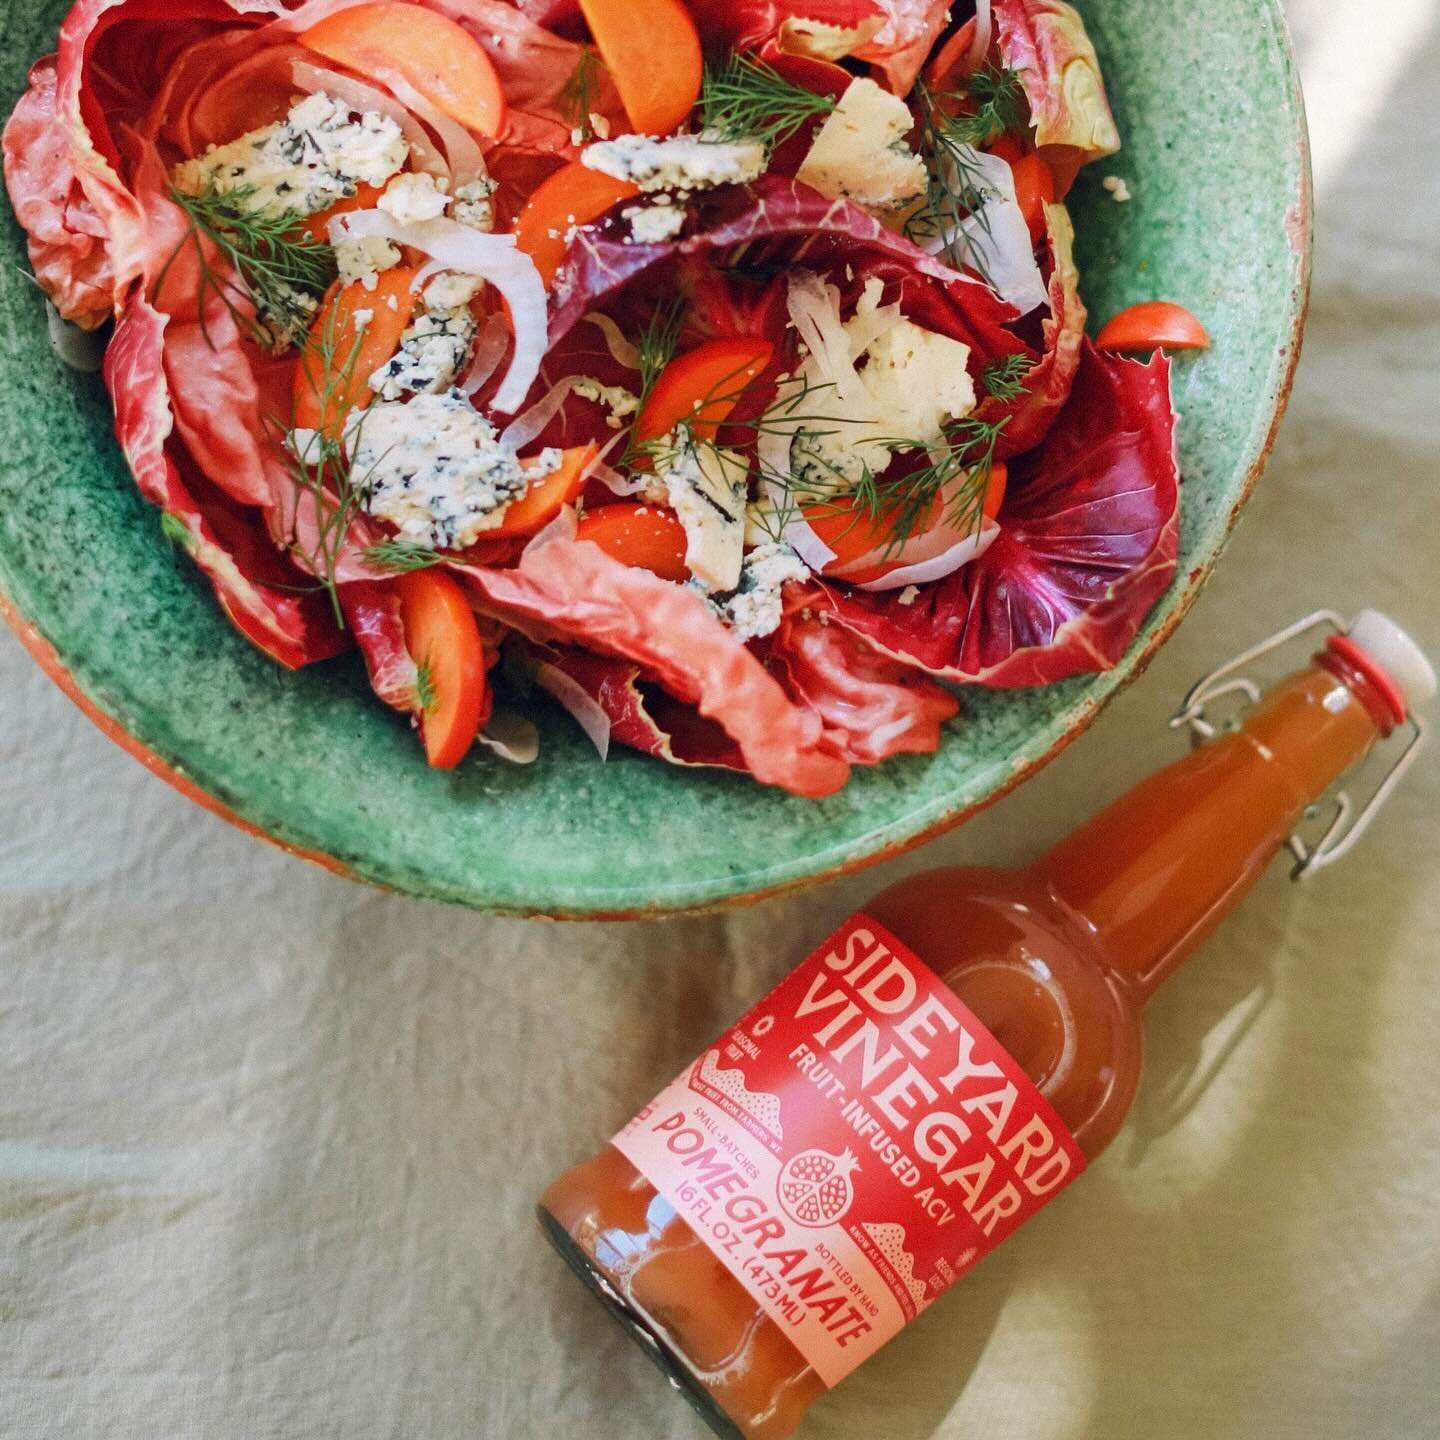 Community Recipe Spotlight! This Pomegranate Vinaigrette shines bright on top of the Chicory, Persimmon and Blue Cheese Salad. Bring vibrancy to your table during the winter months ahead with this stunning seasonal salad, and a delightful dressing ma